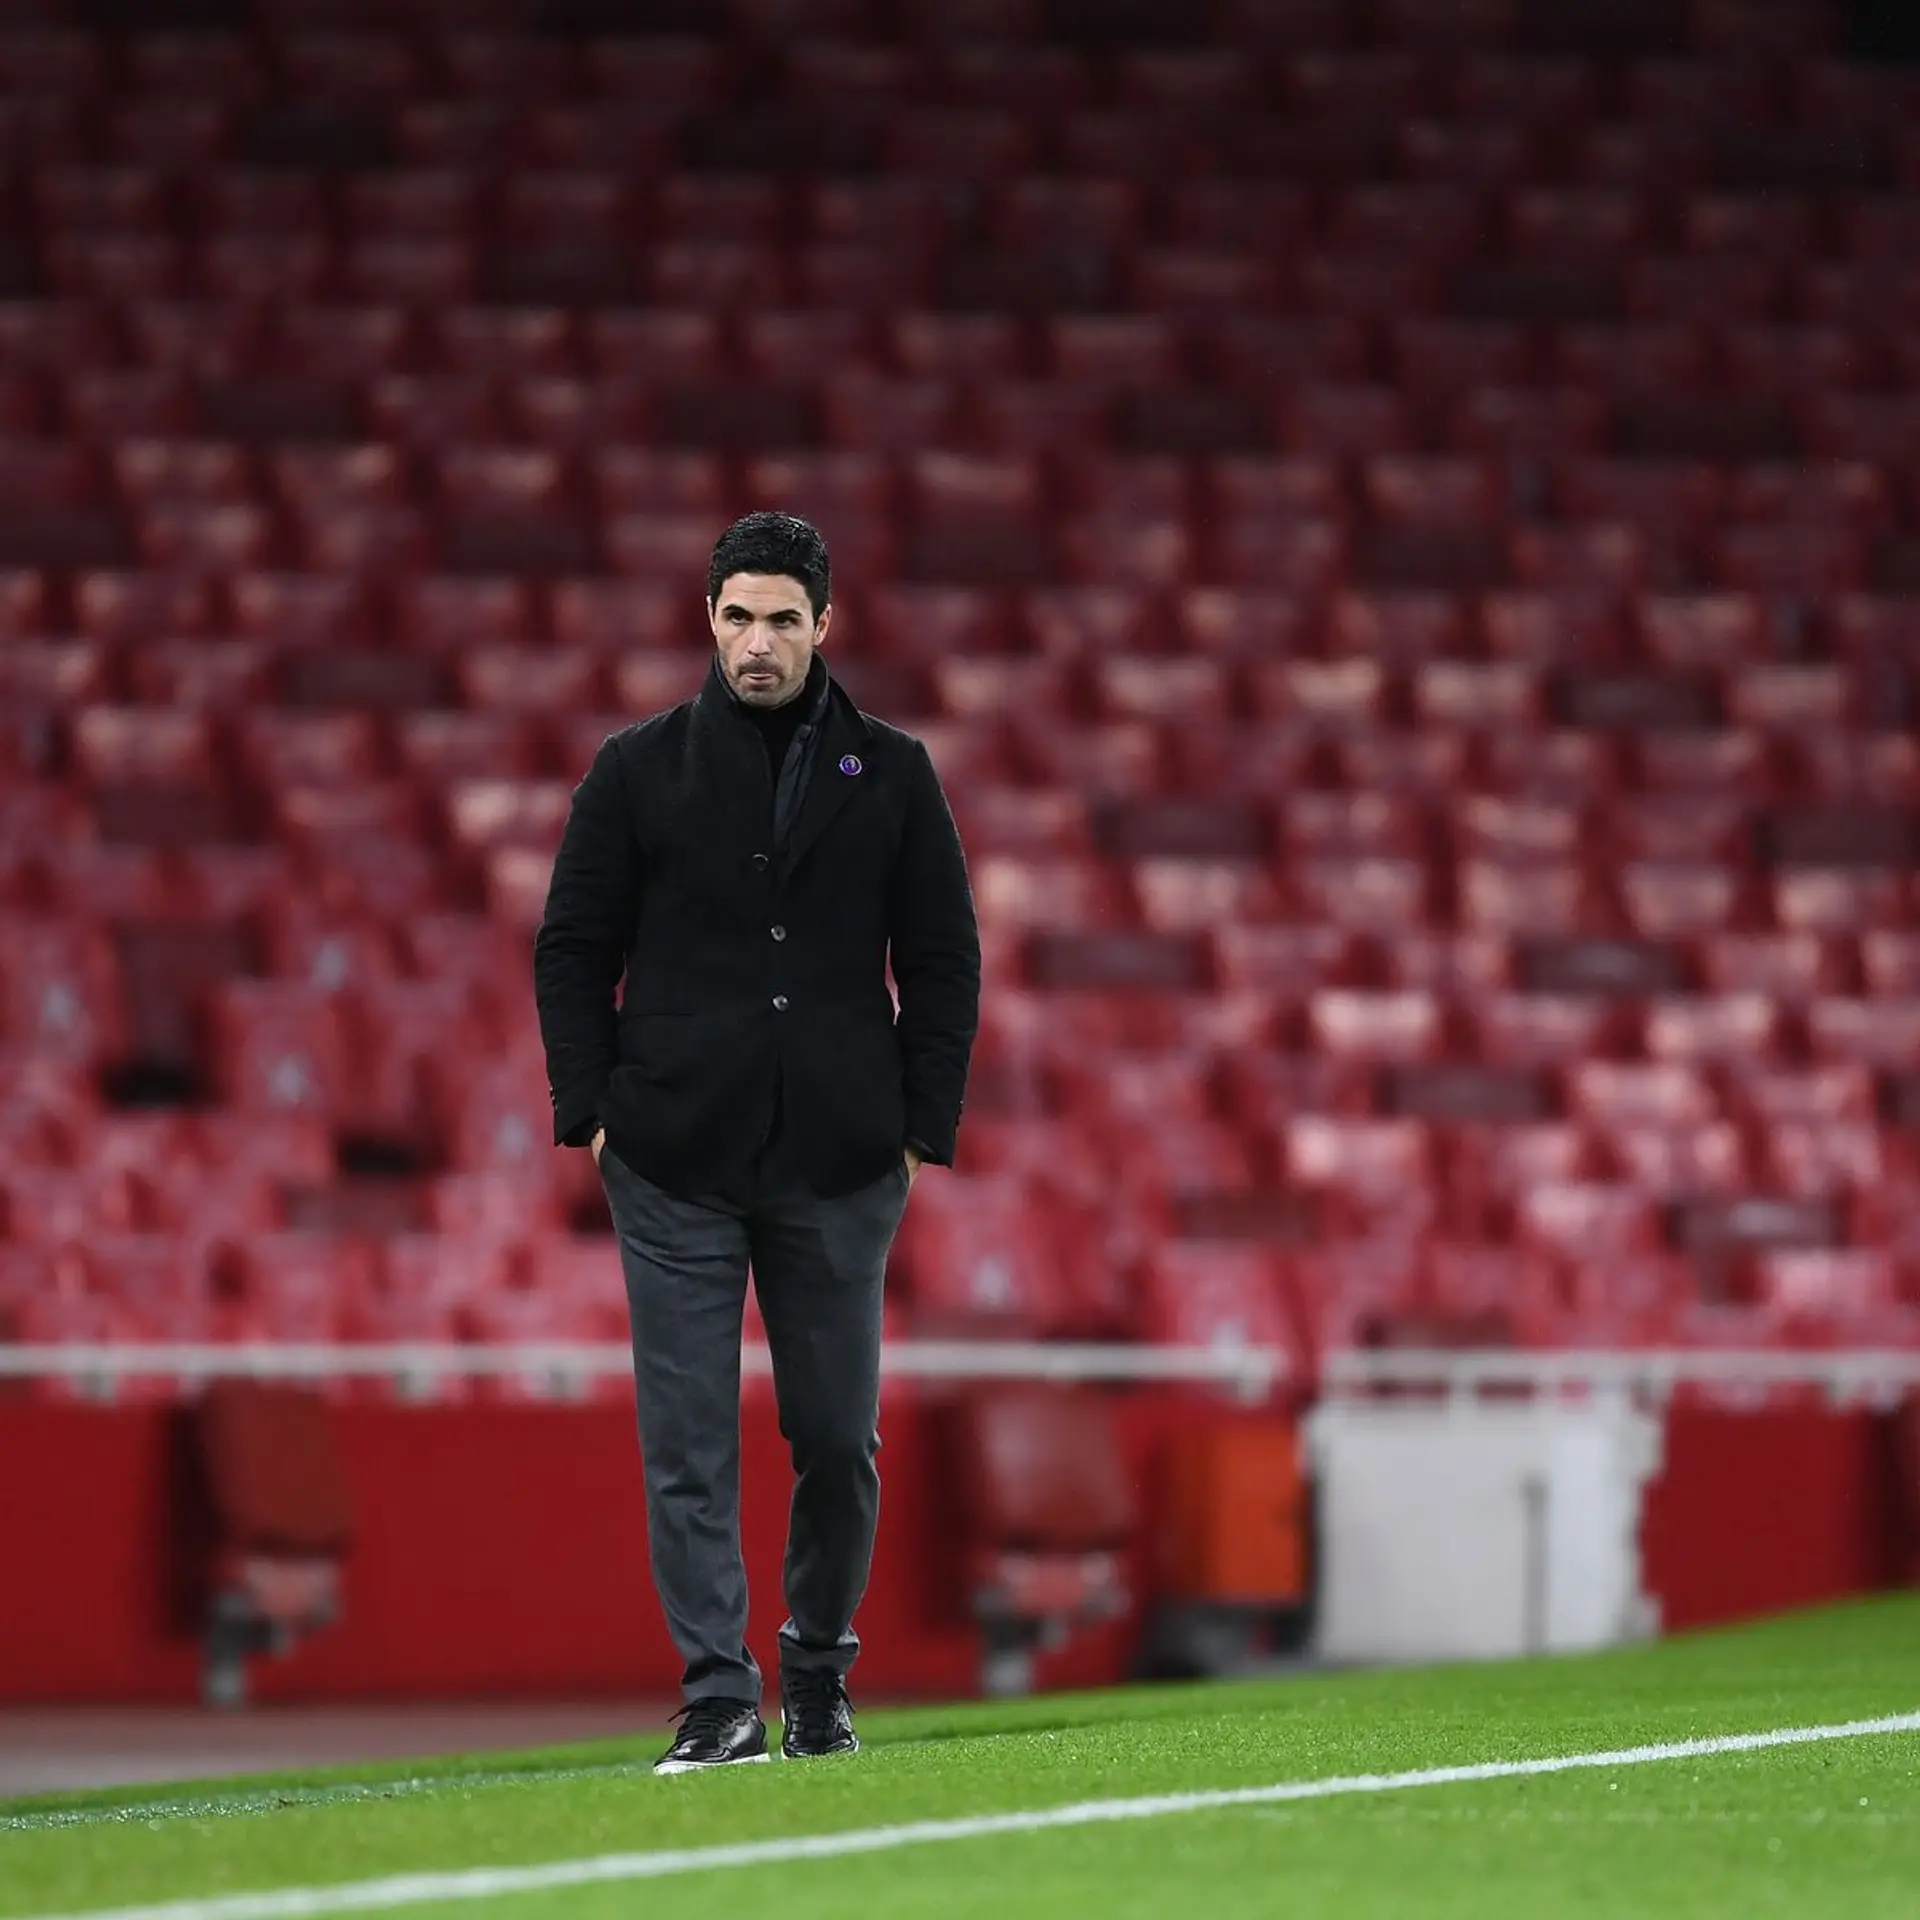 Arteta Lost His Way is my Biggest Disappointment 